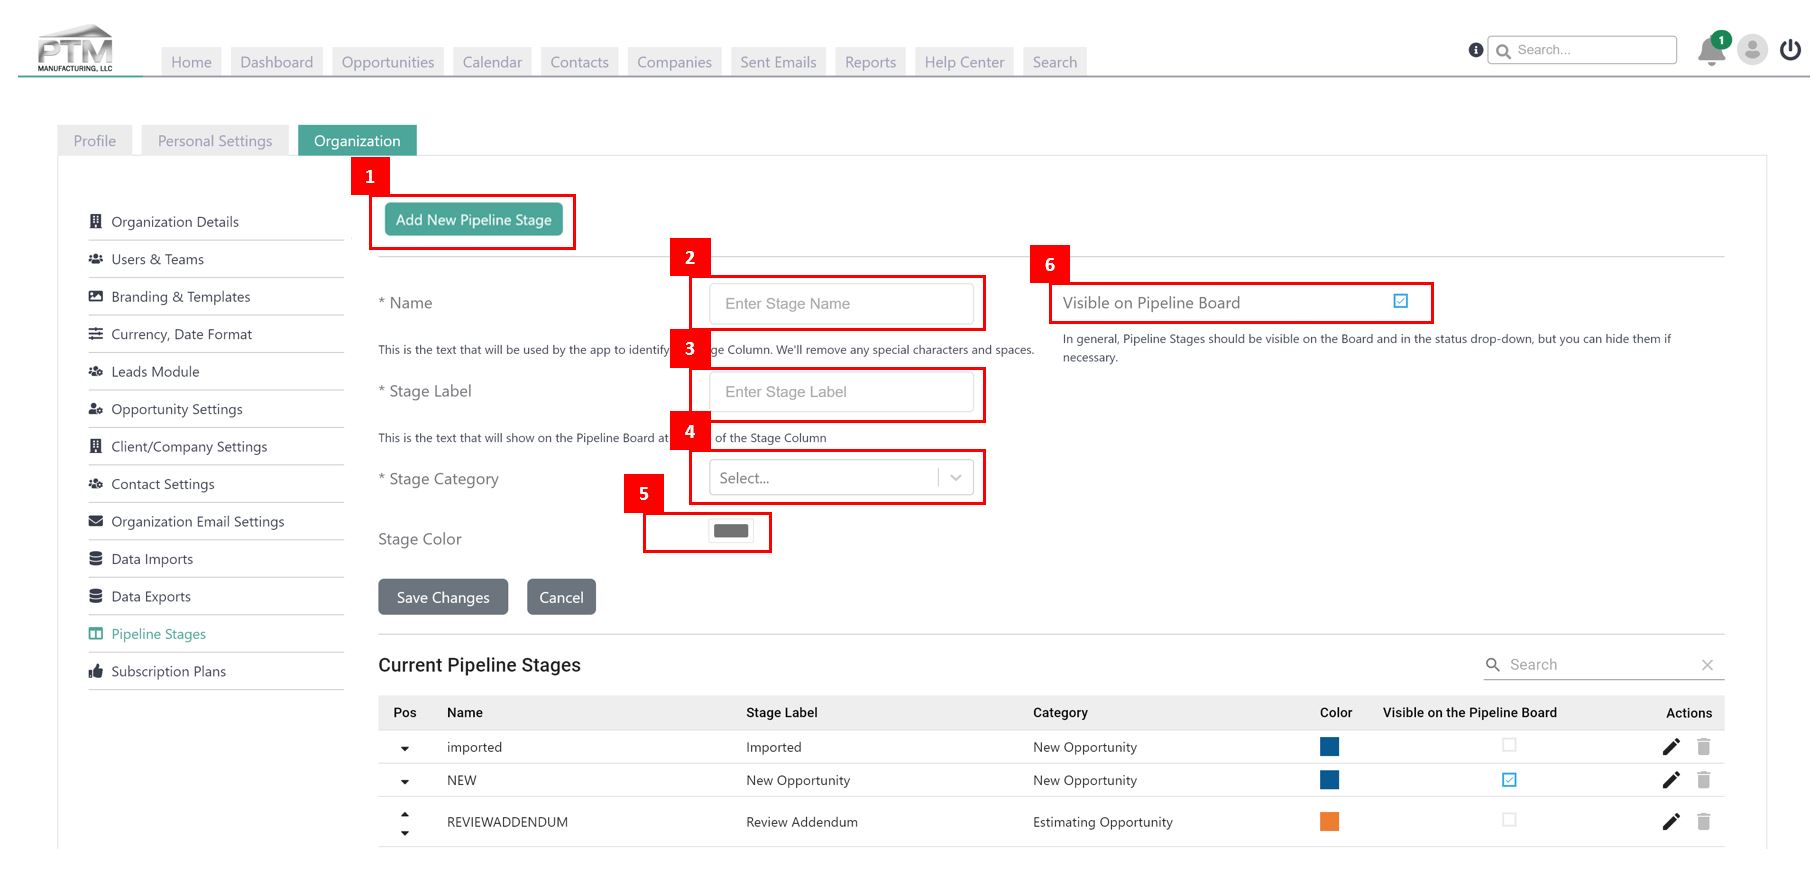 Customize Your Sales Pipeline - Adding Your Own Sales Pipeline Stages